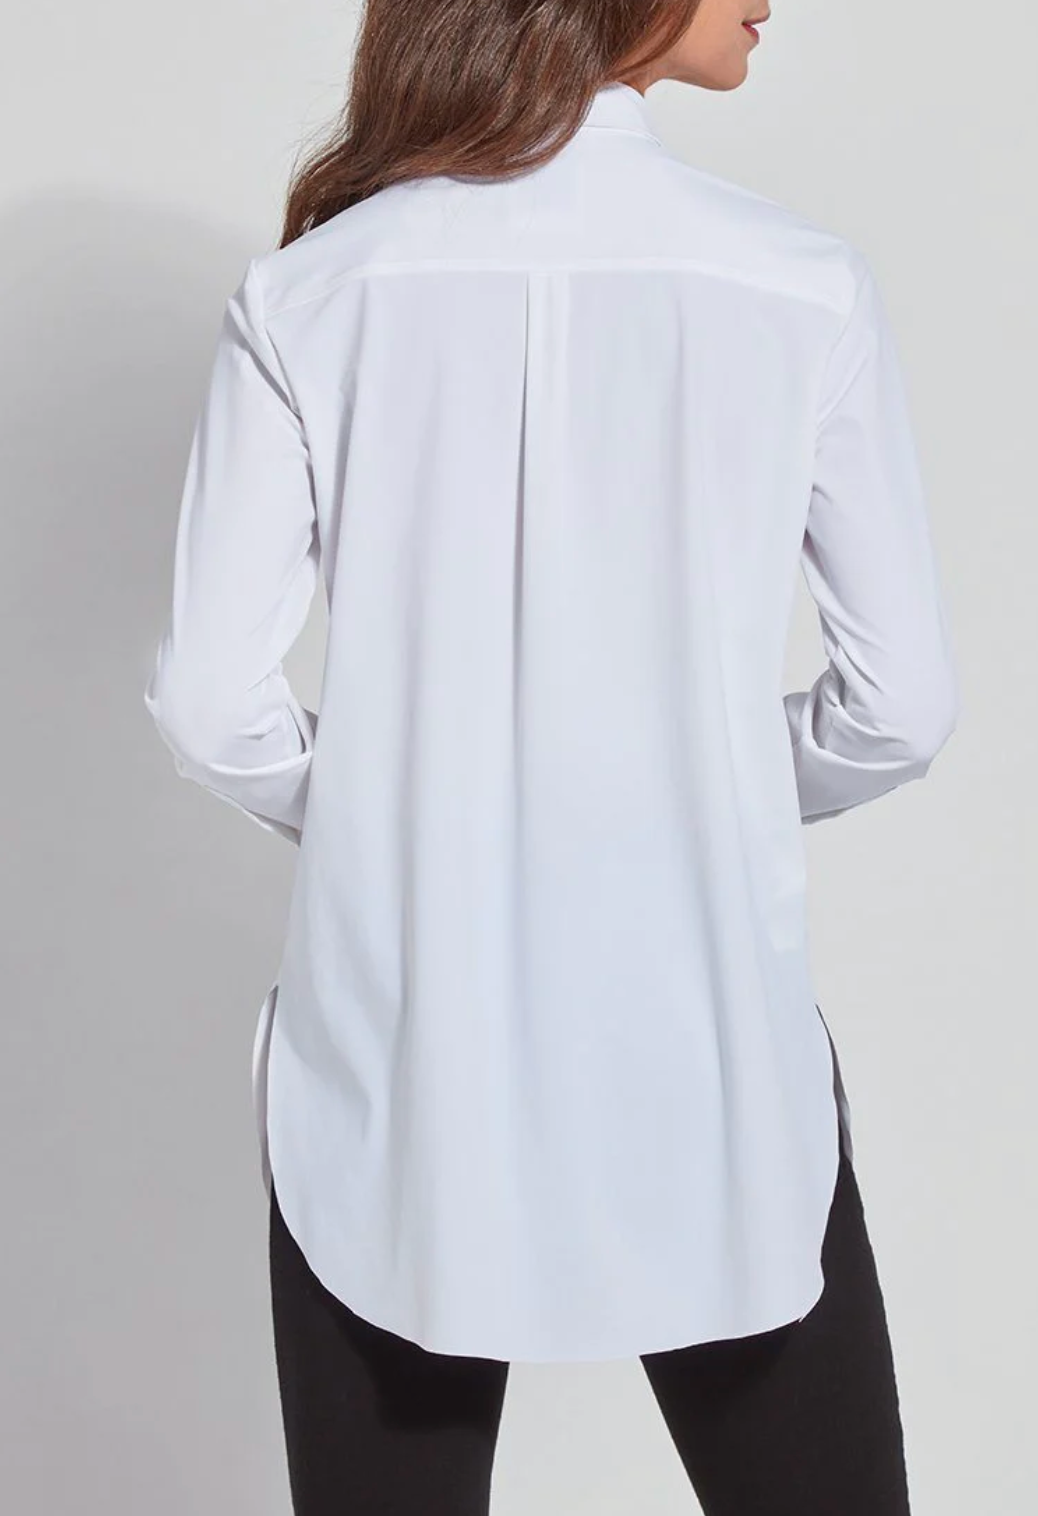 Schiffer Blouse in White - The French Shoppe